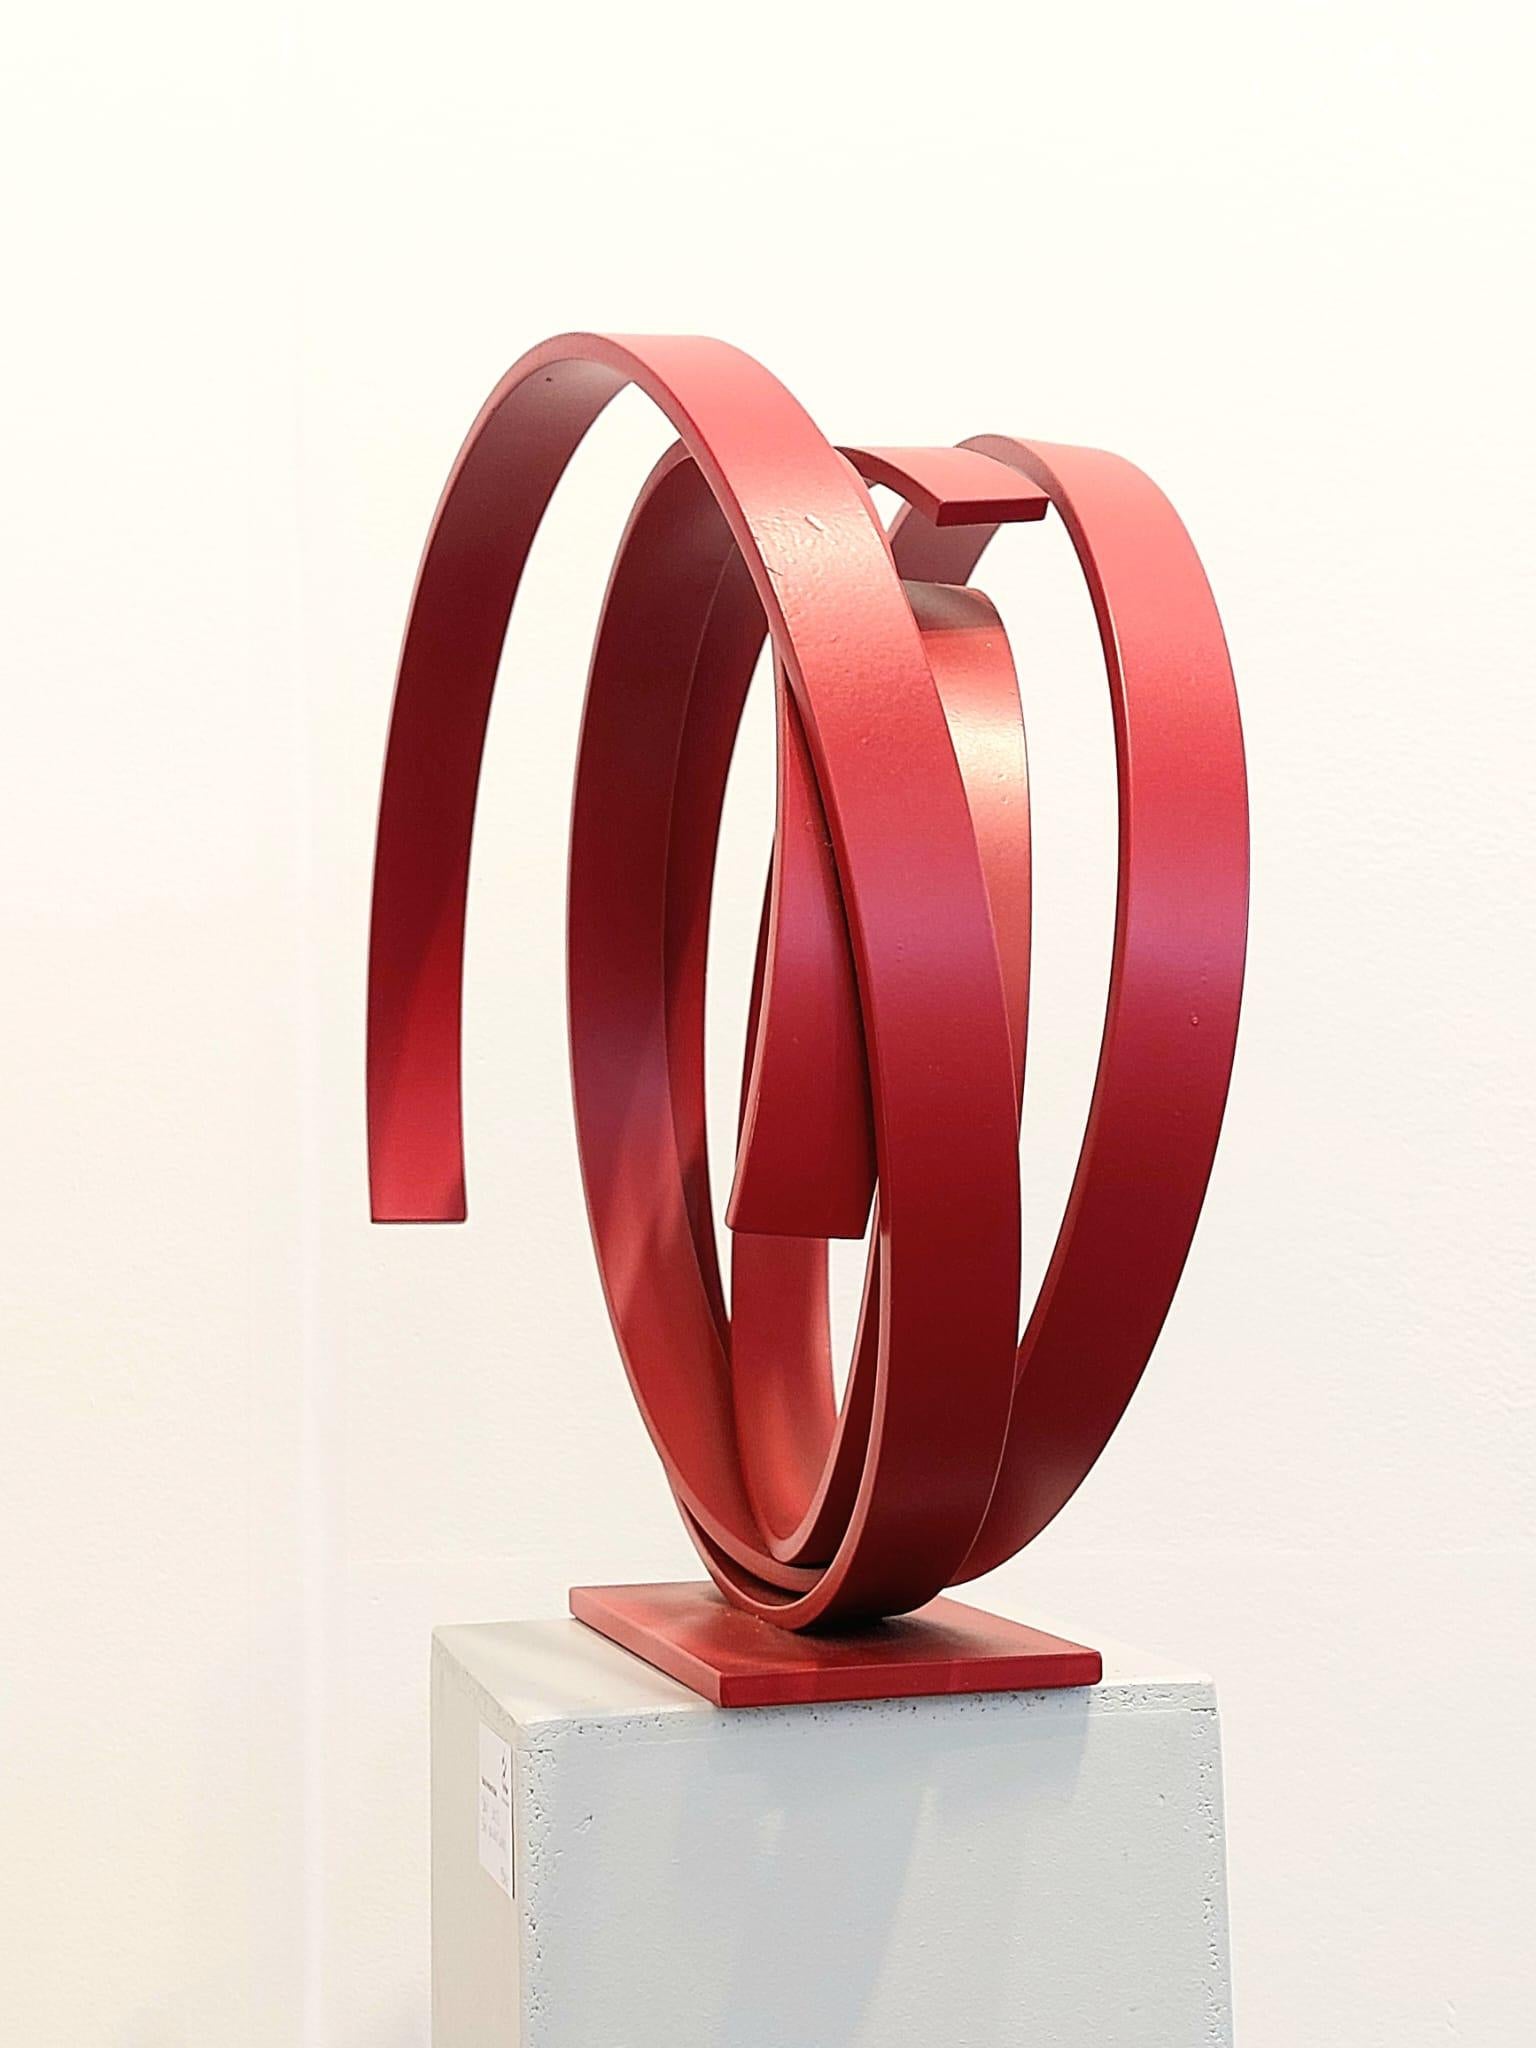 Small Red Orbit by Kuno Vollet - Large Contemporary Round Orbit sculpture  For Sale 4